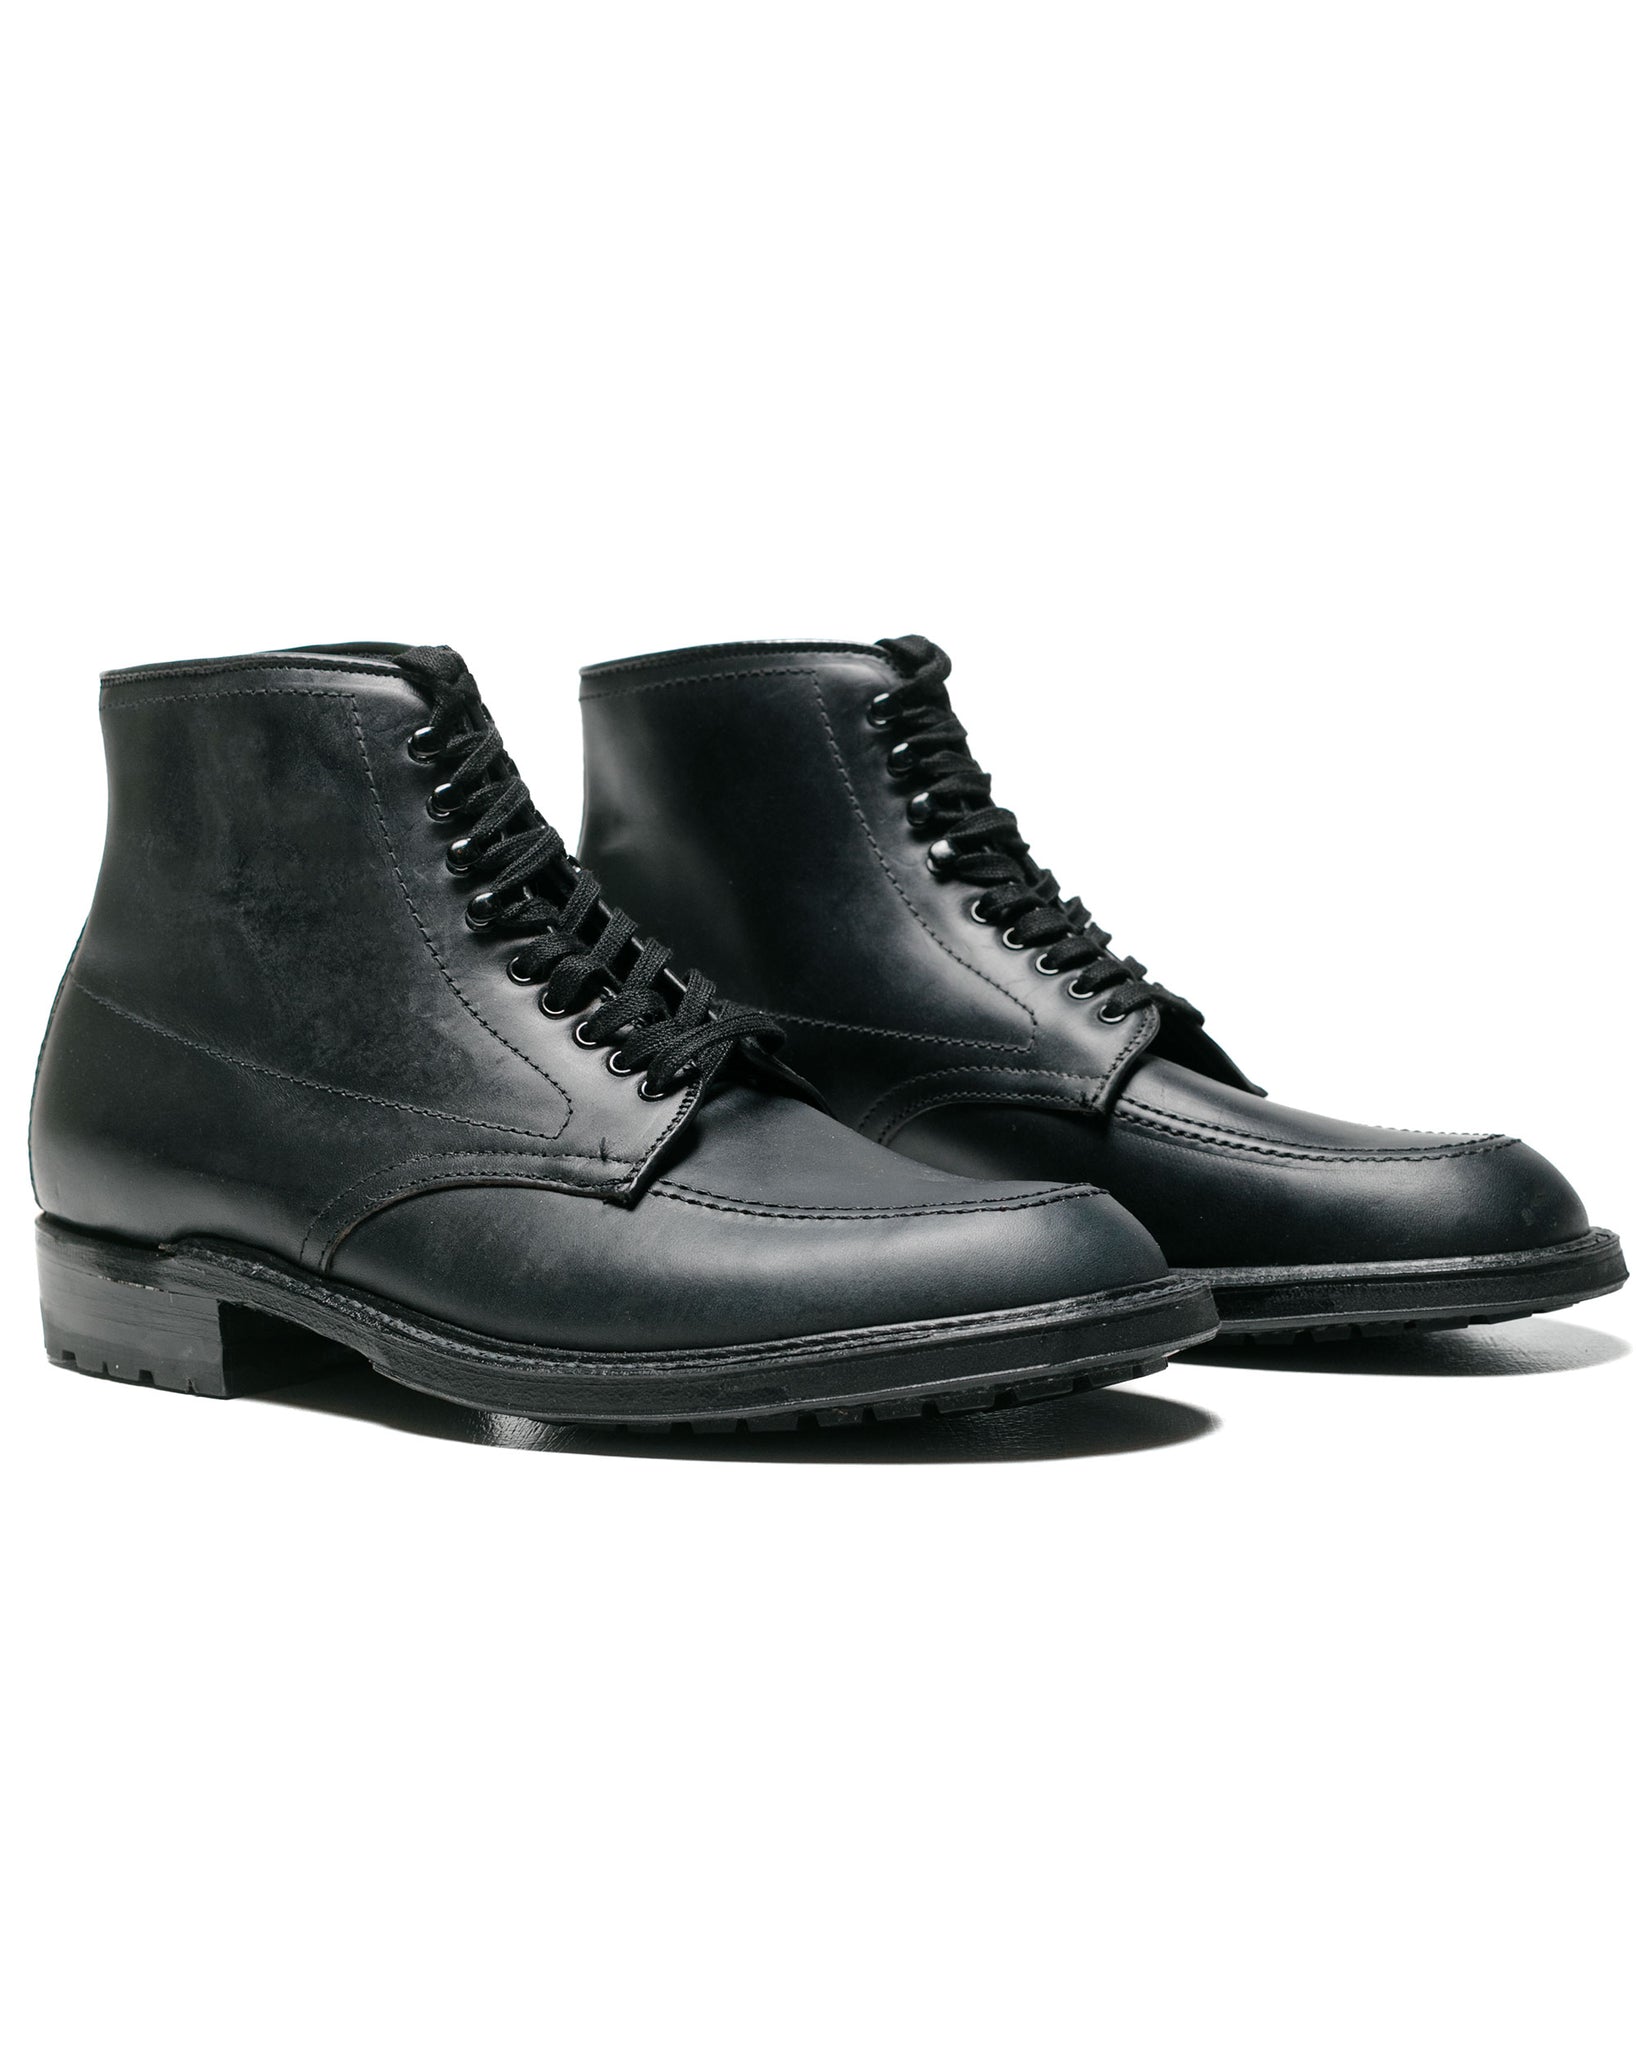 Alden Indy Boot Inside Out Navy Silksport with Commando Sole G4902HC side